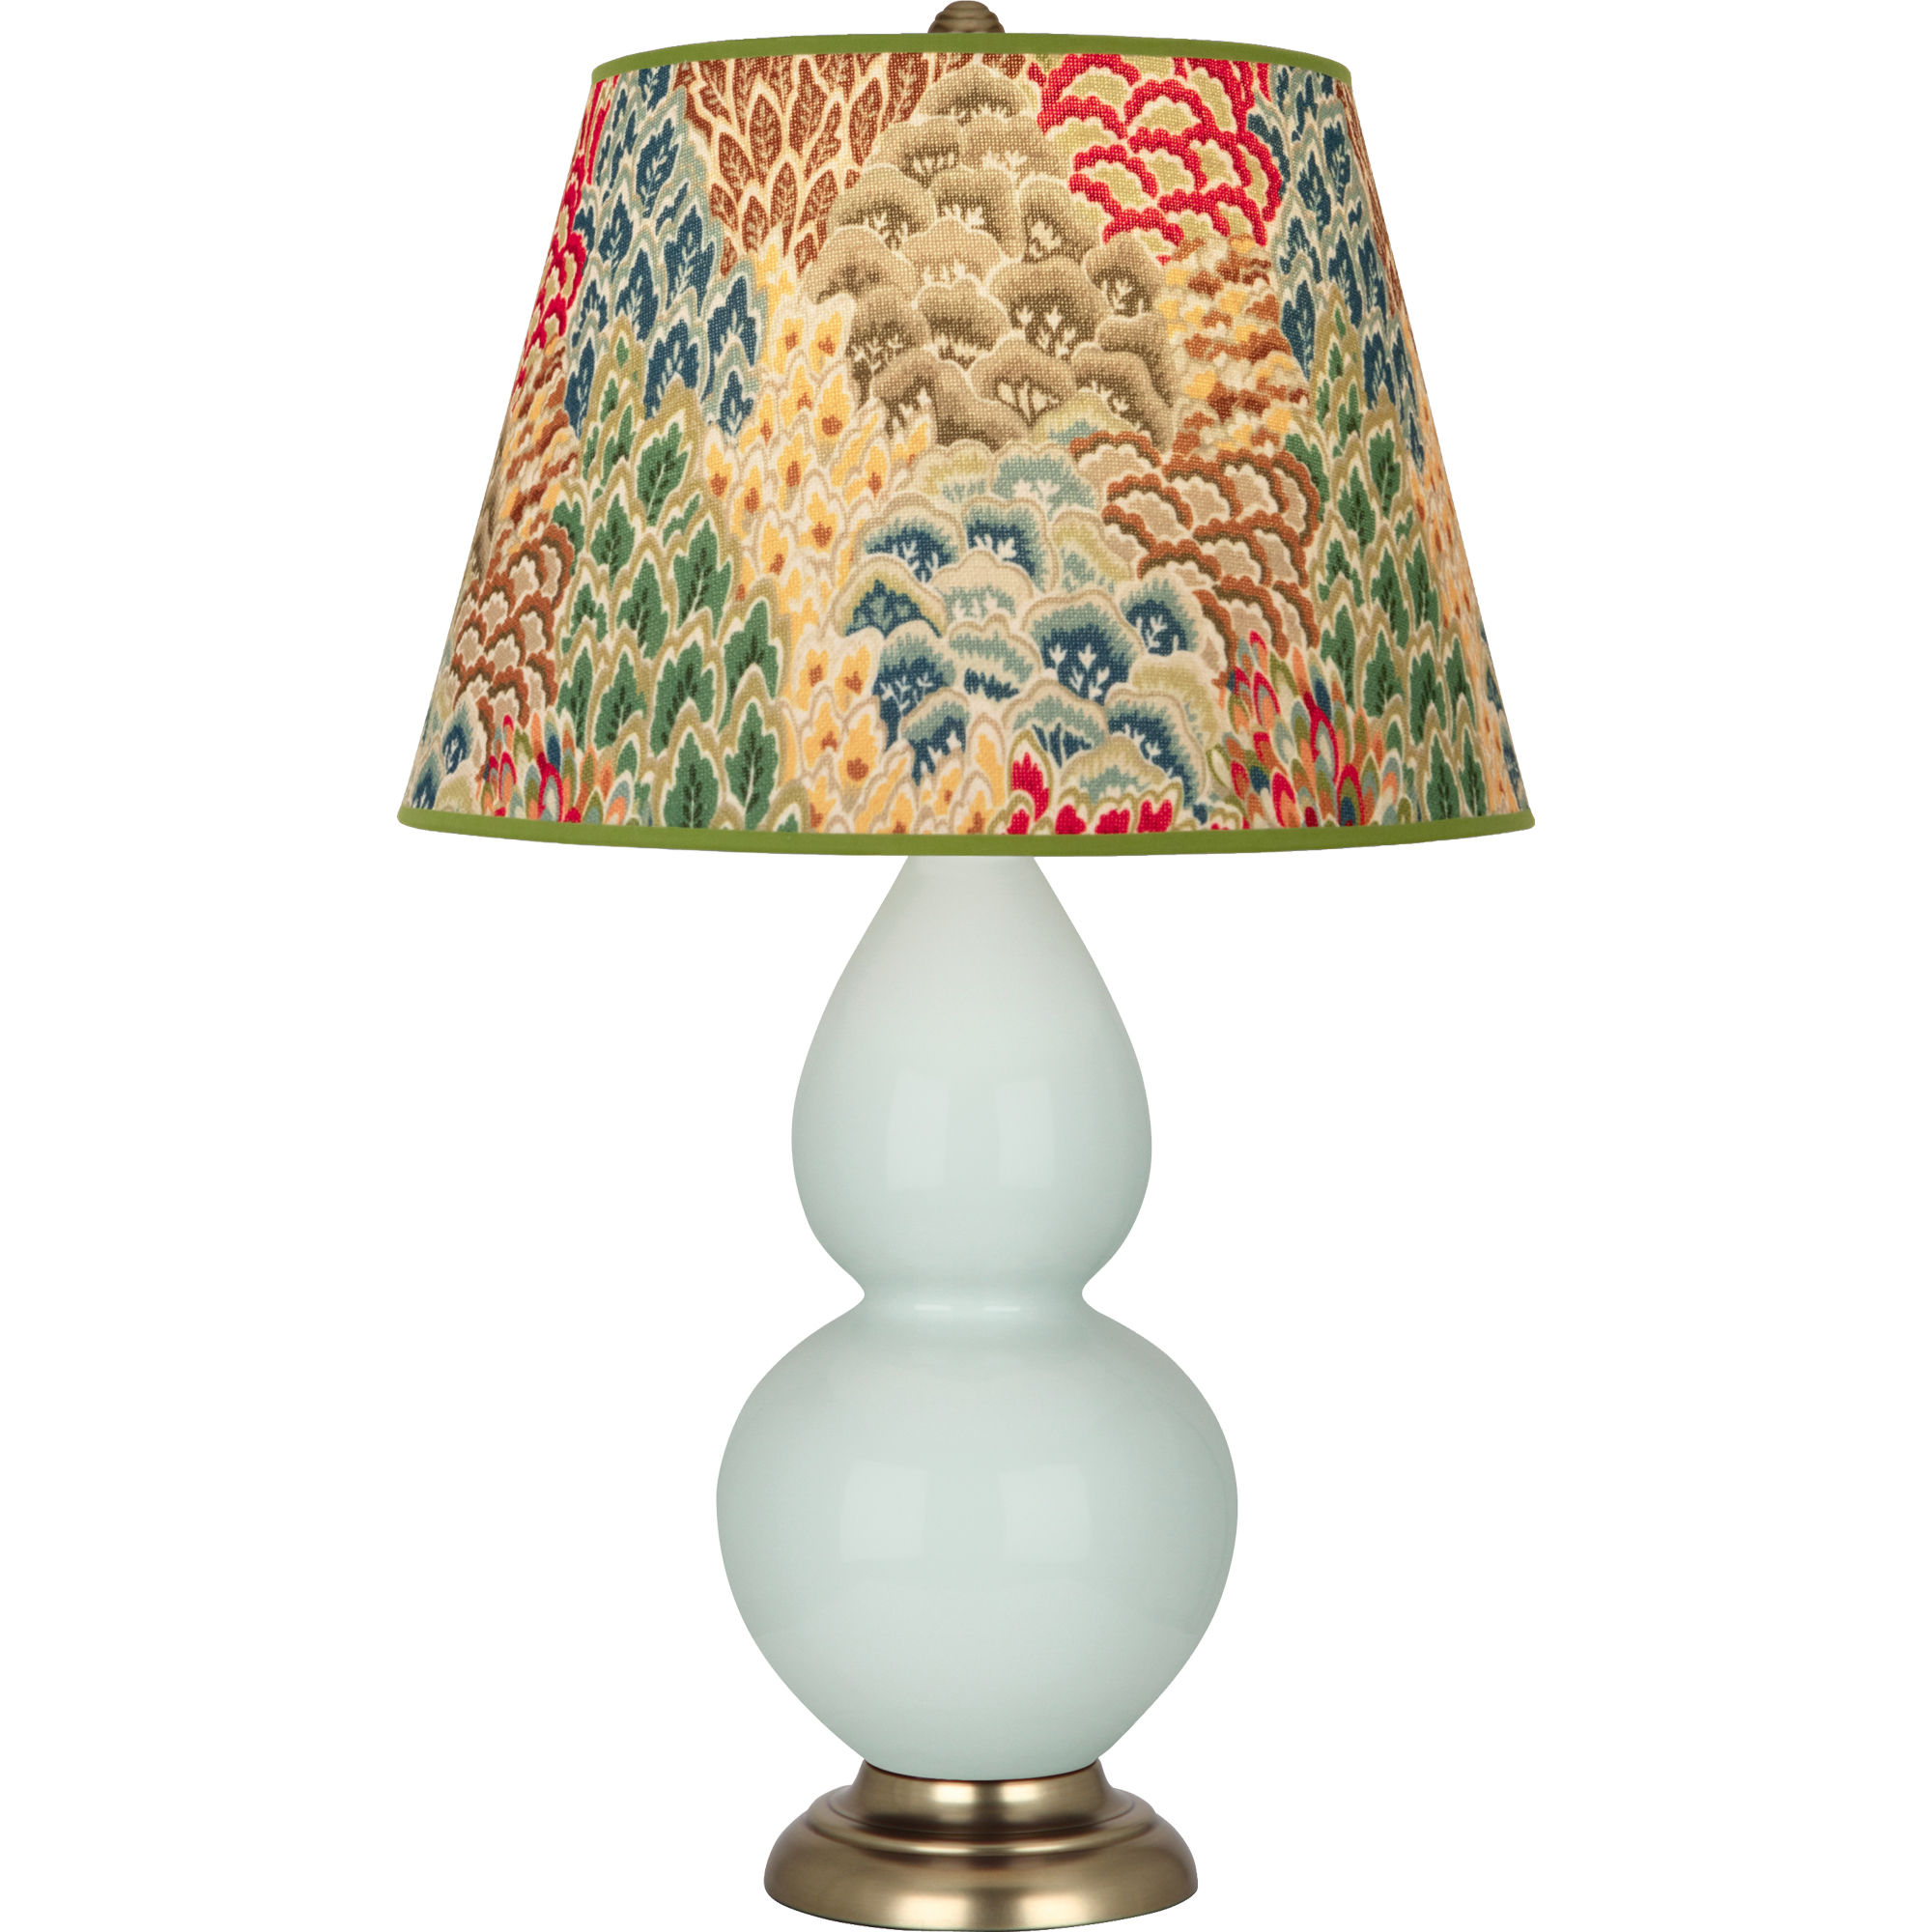 Double Gourd Table Lamp Style #1789F